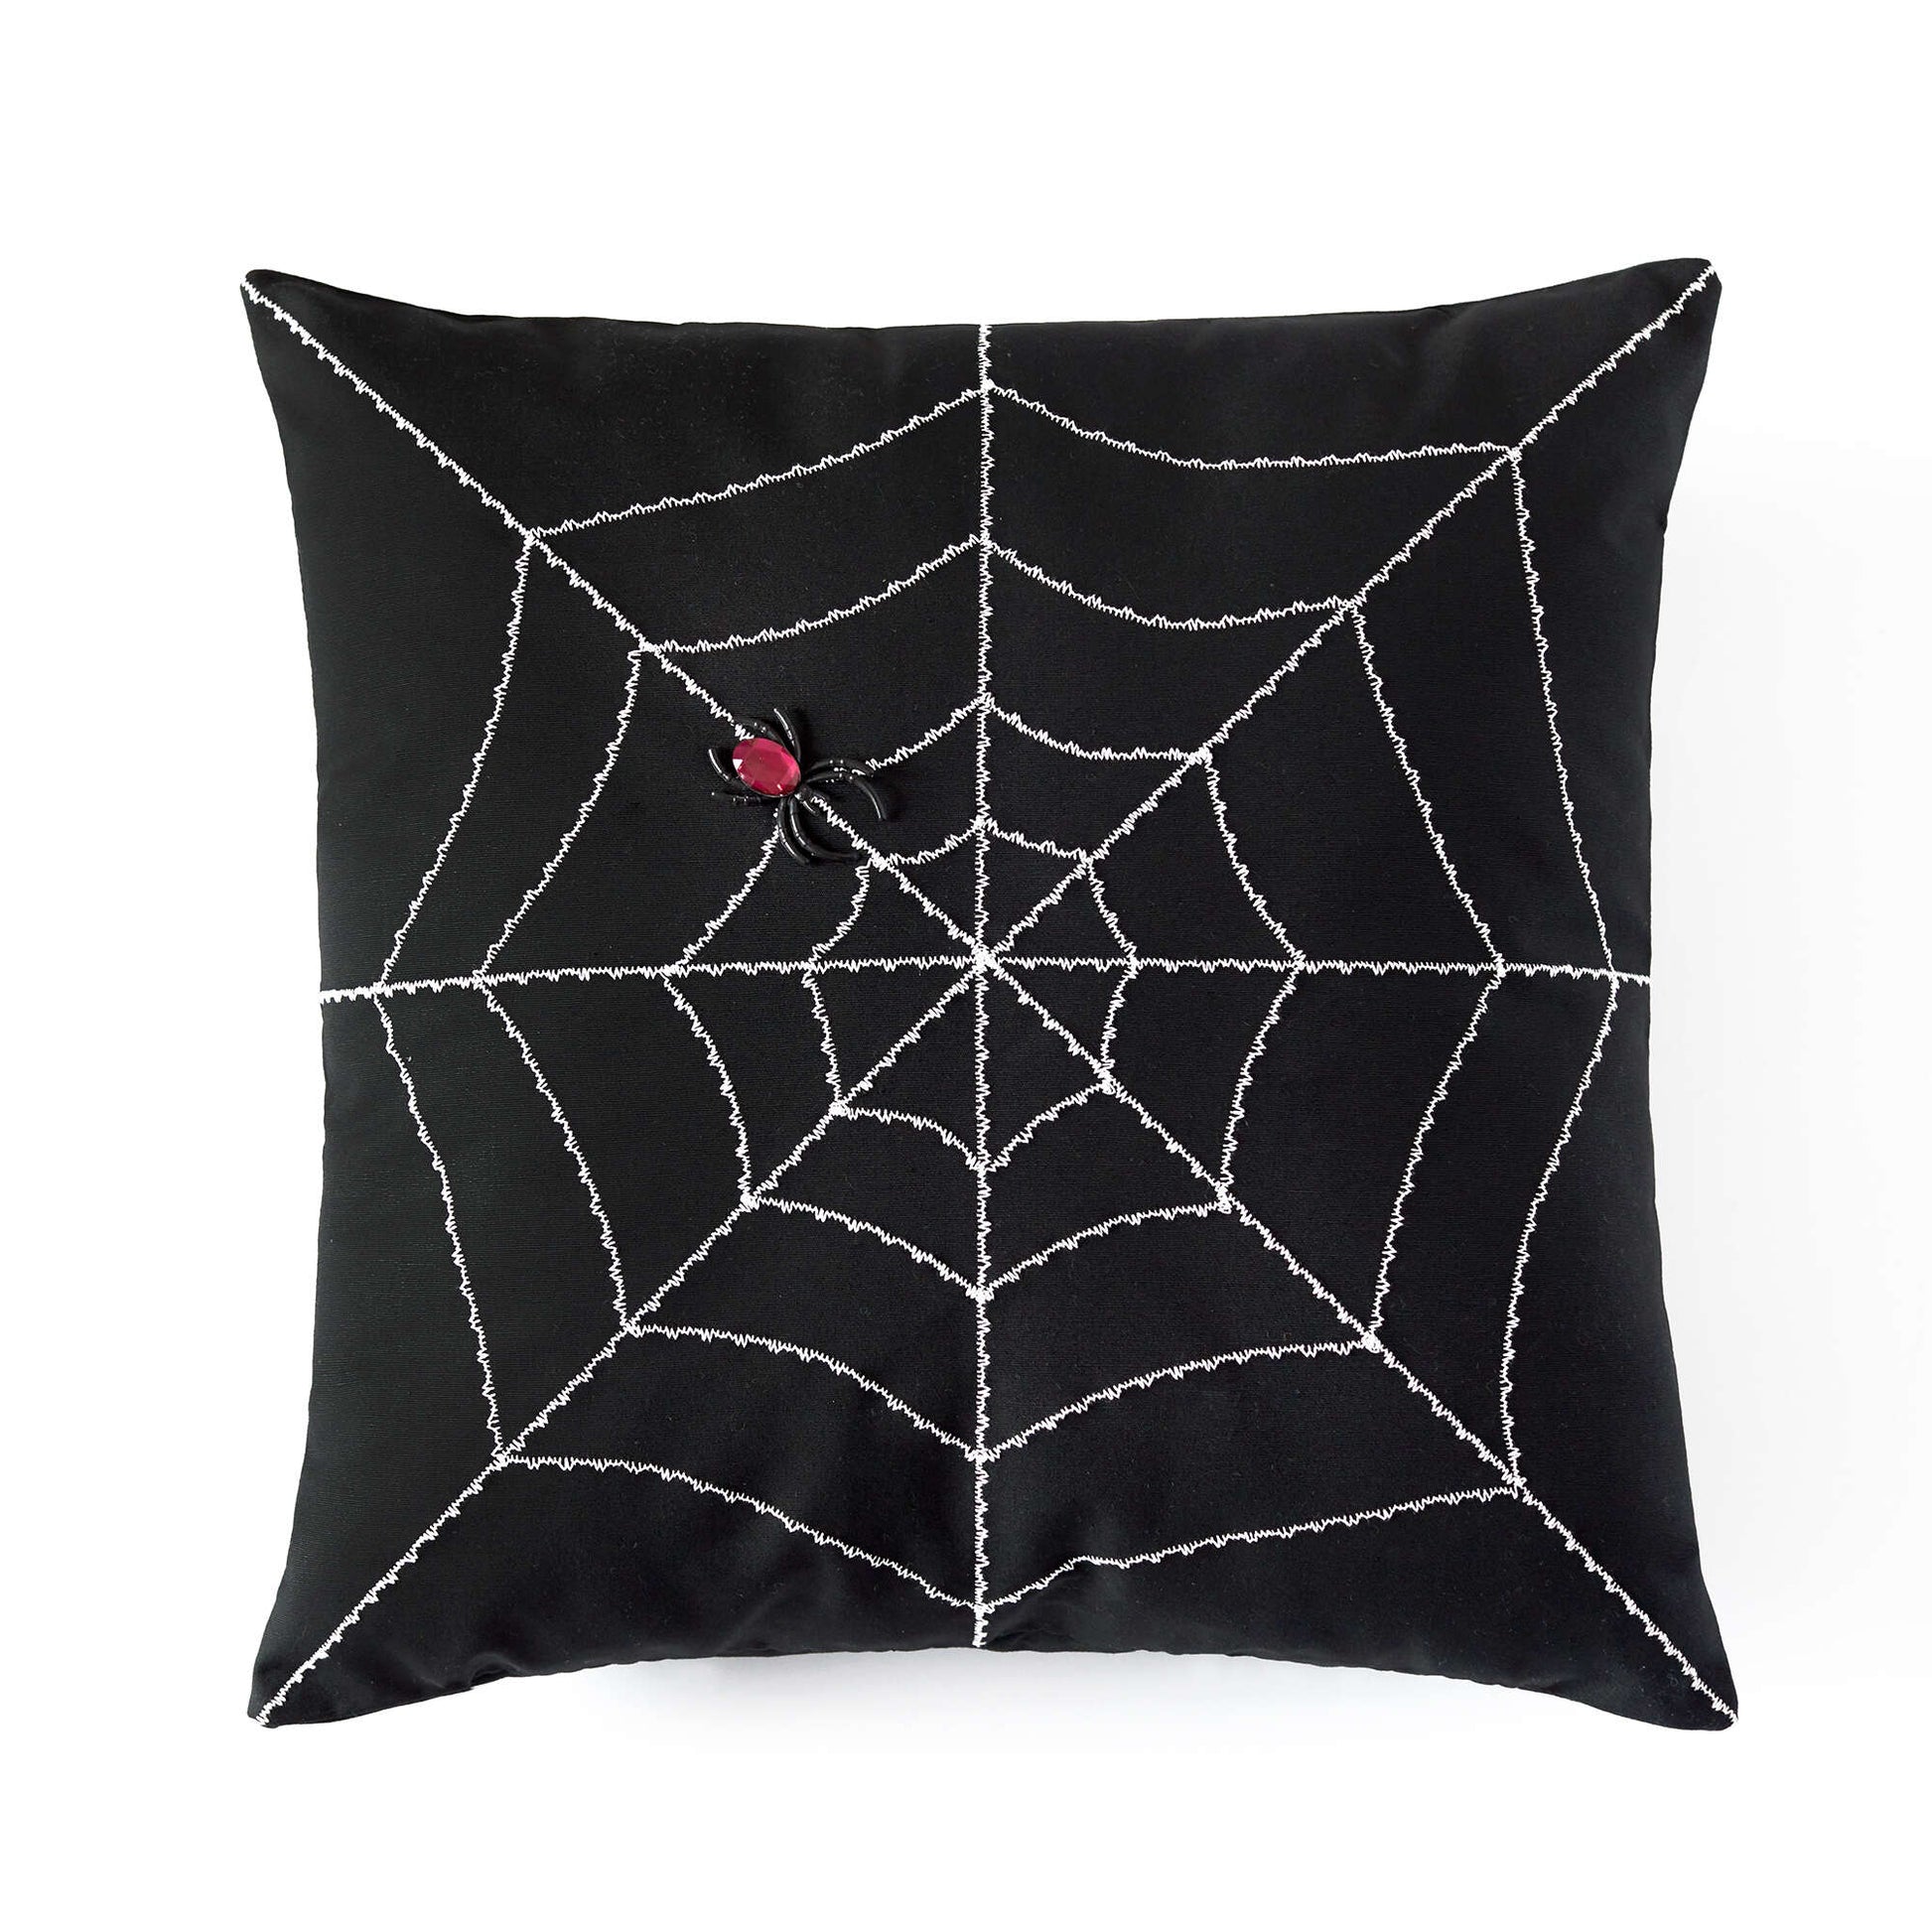 Free Coats & Clark Spider Web Pillow Sewing Pattern